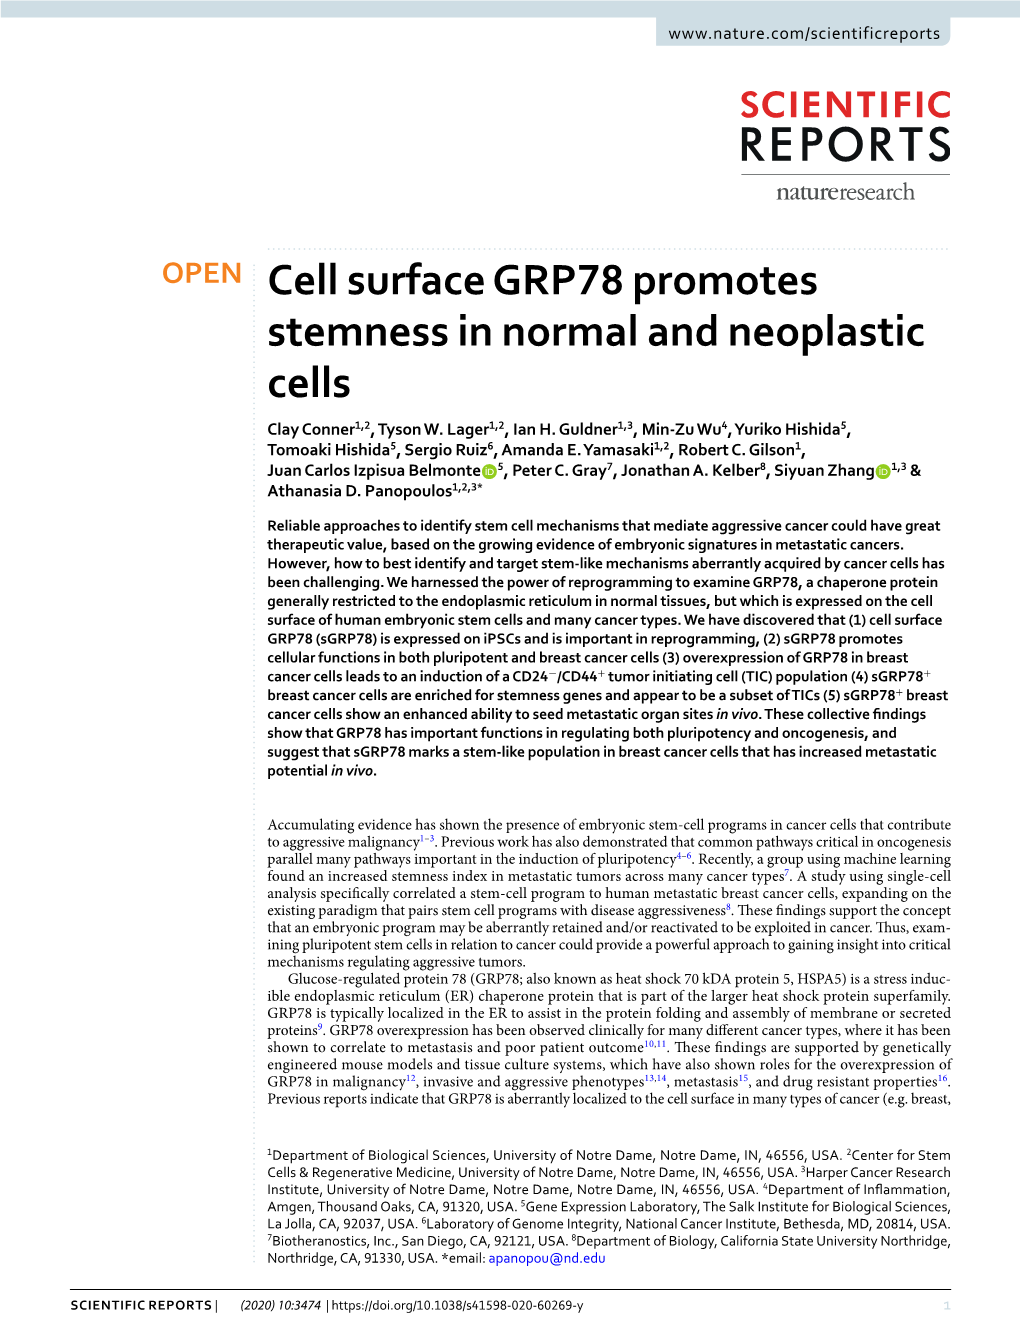 Cell Surface GRP78 Promotes Stemness in Normal and Neoplastic Cells Clay Conner1,2, Tyson W